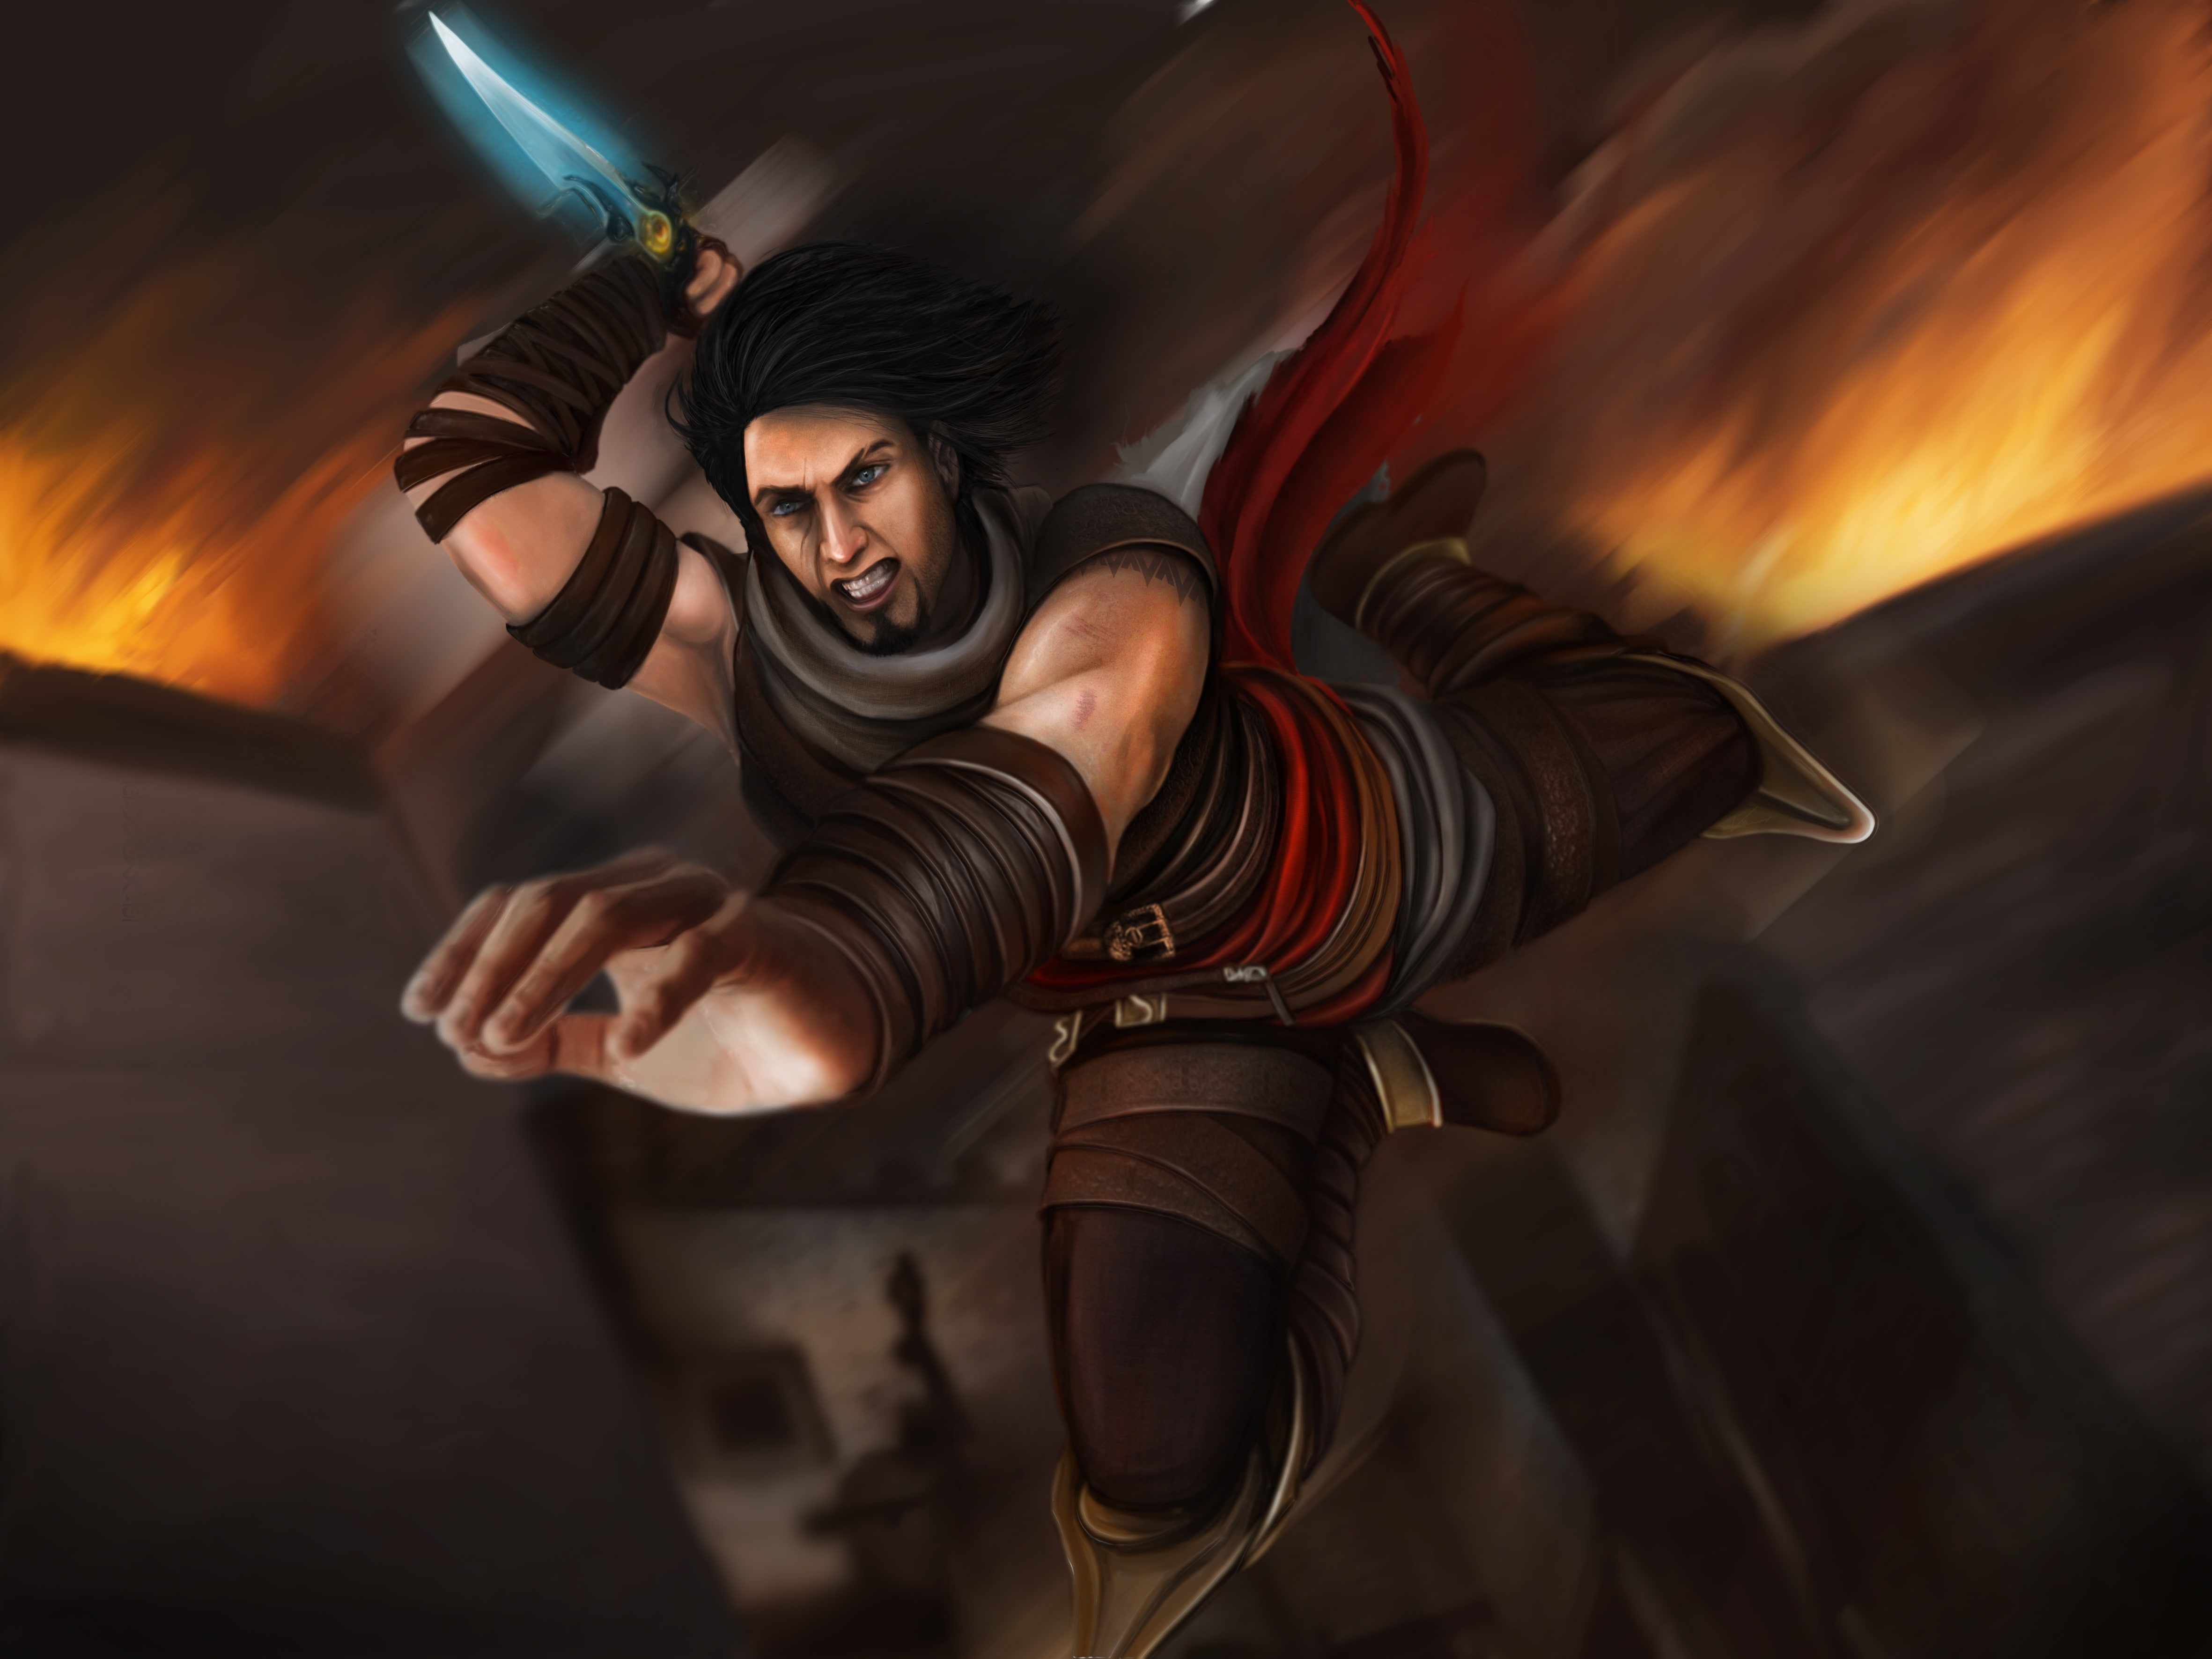 jump, knife, fan art, prince of persia: warrior within, prince of persia the two thrones